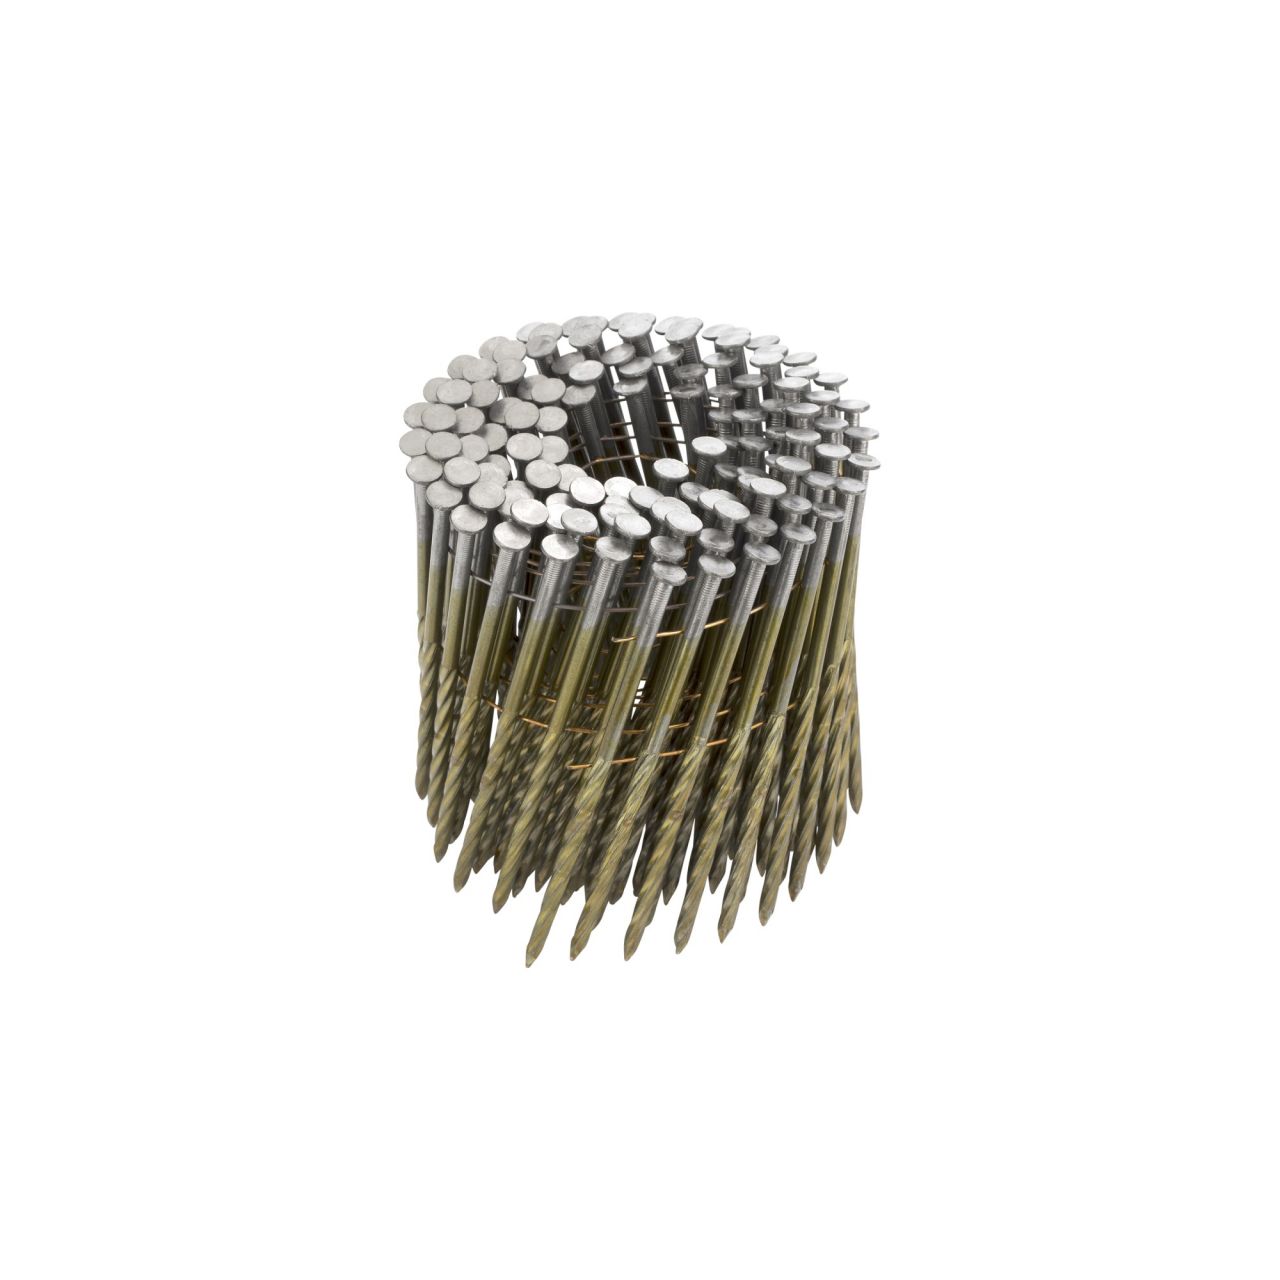 Clavo Coil 3,8 100 mm - Helicoidal / Senc